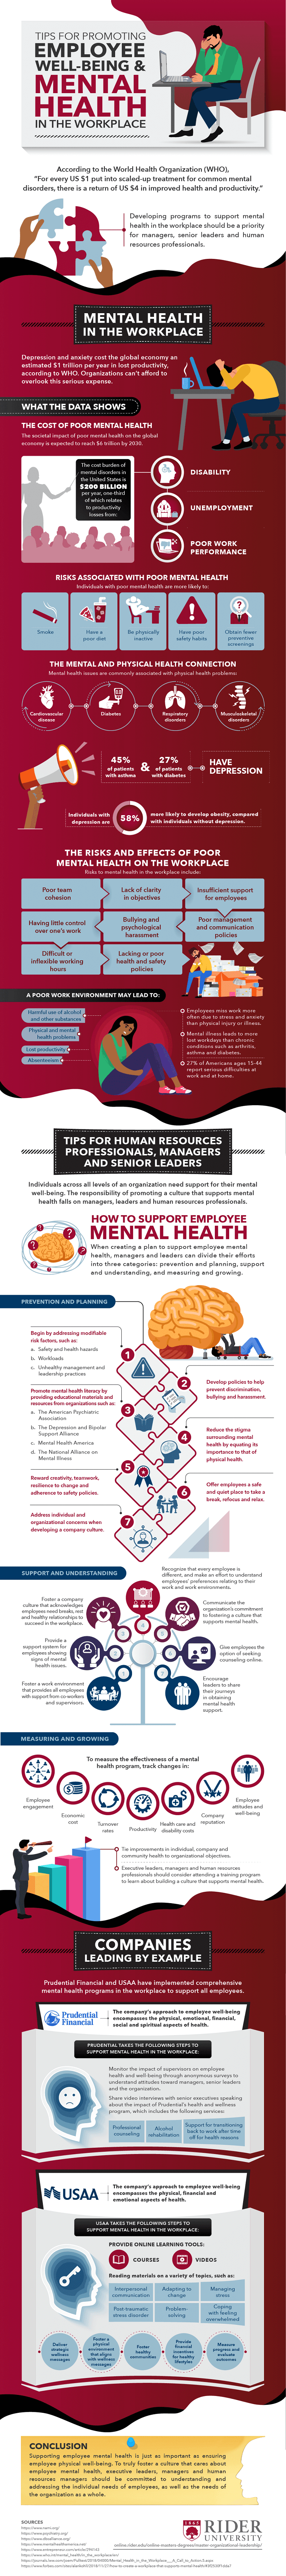 Detailed tips for promoting employee wellbeing and mental health in the workplace